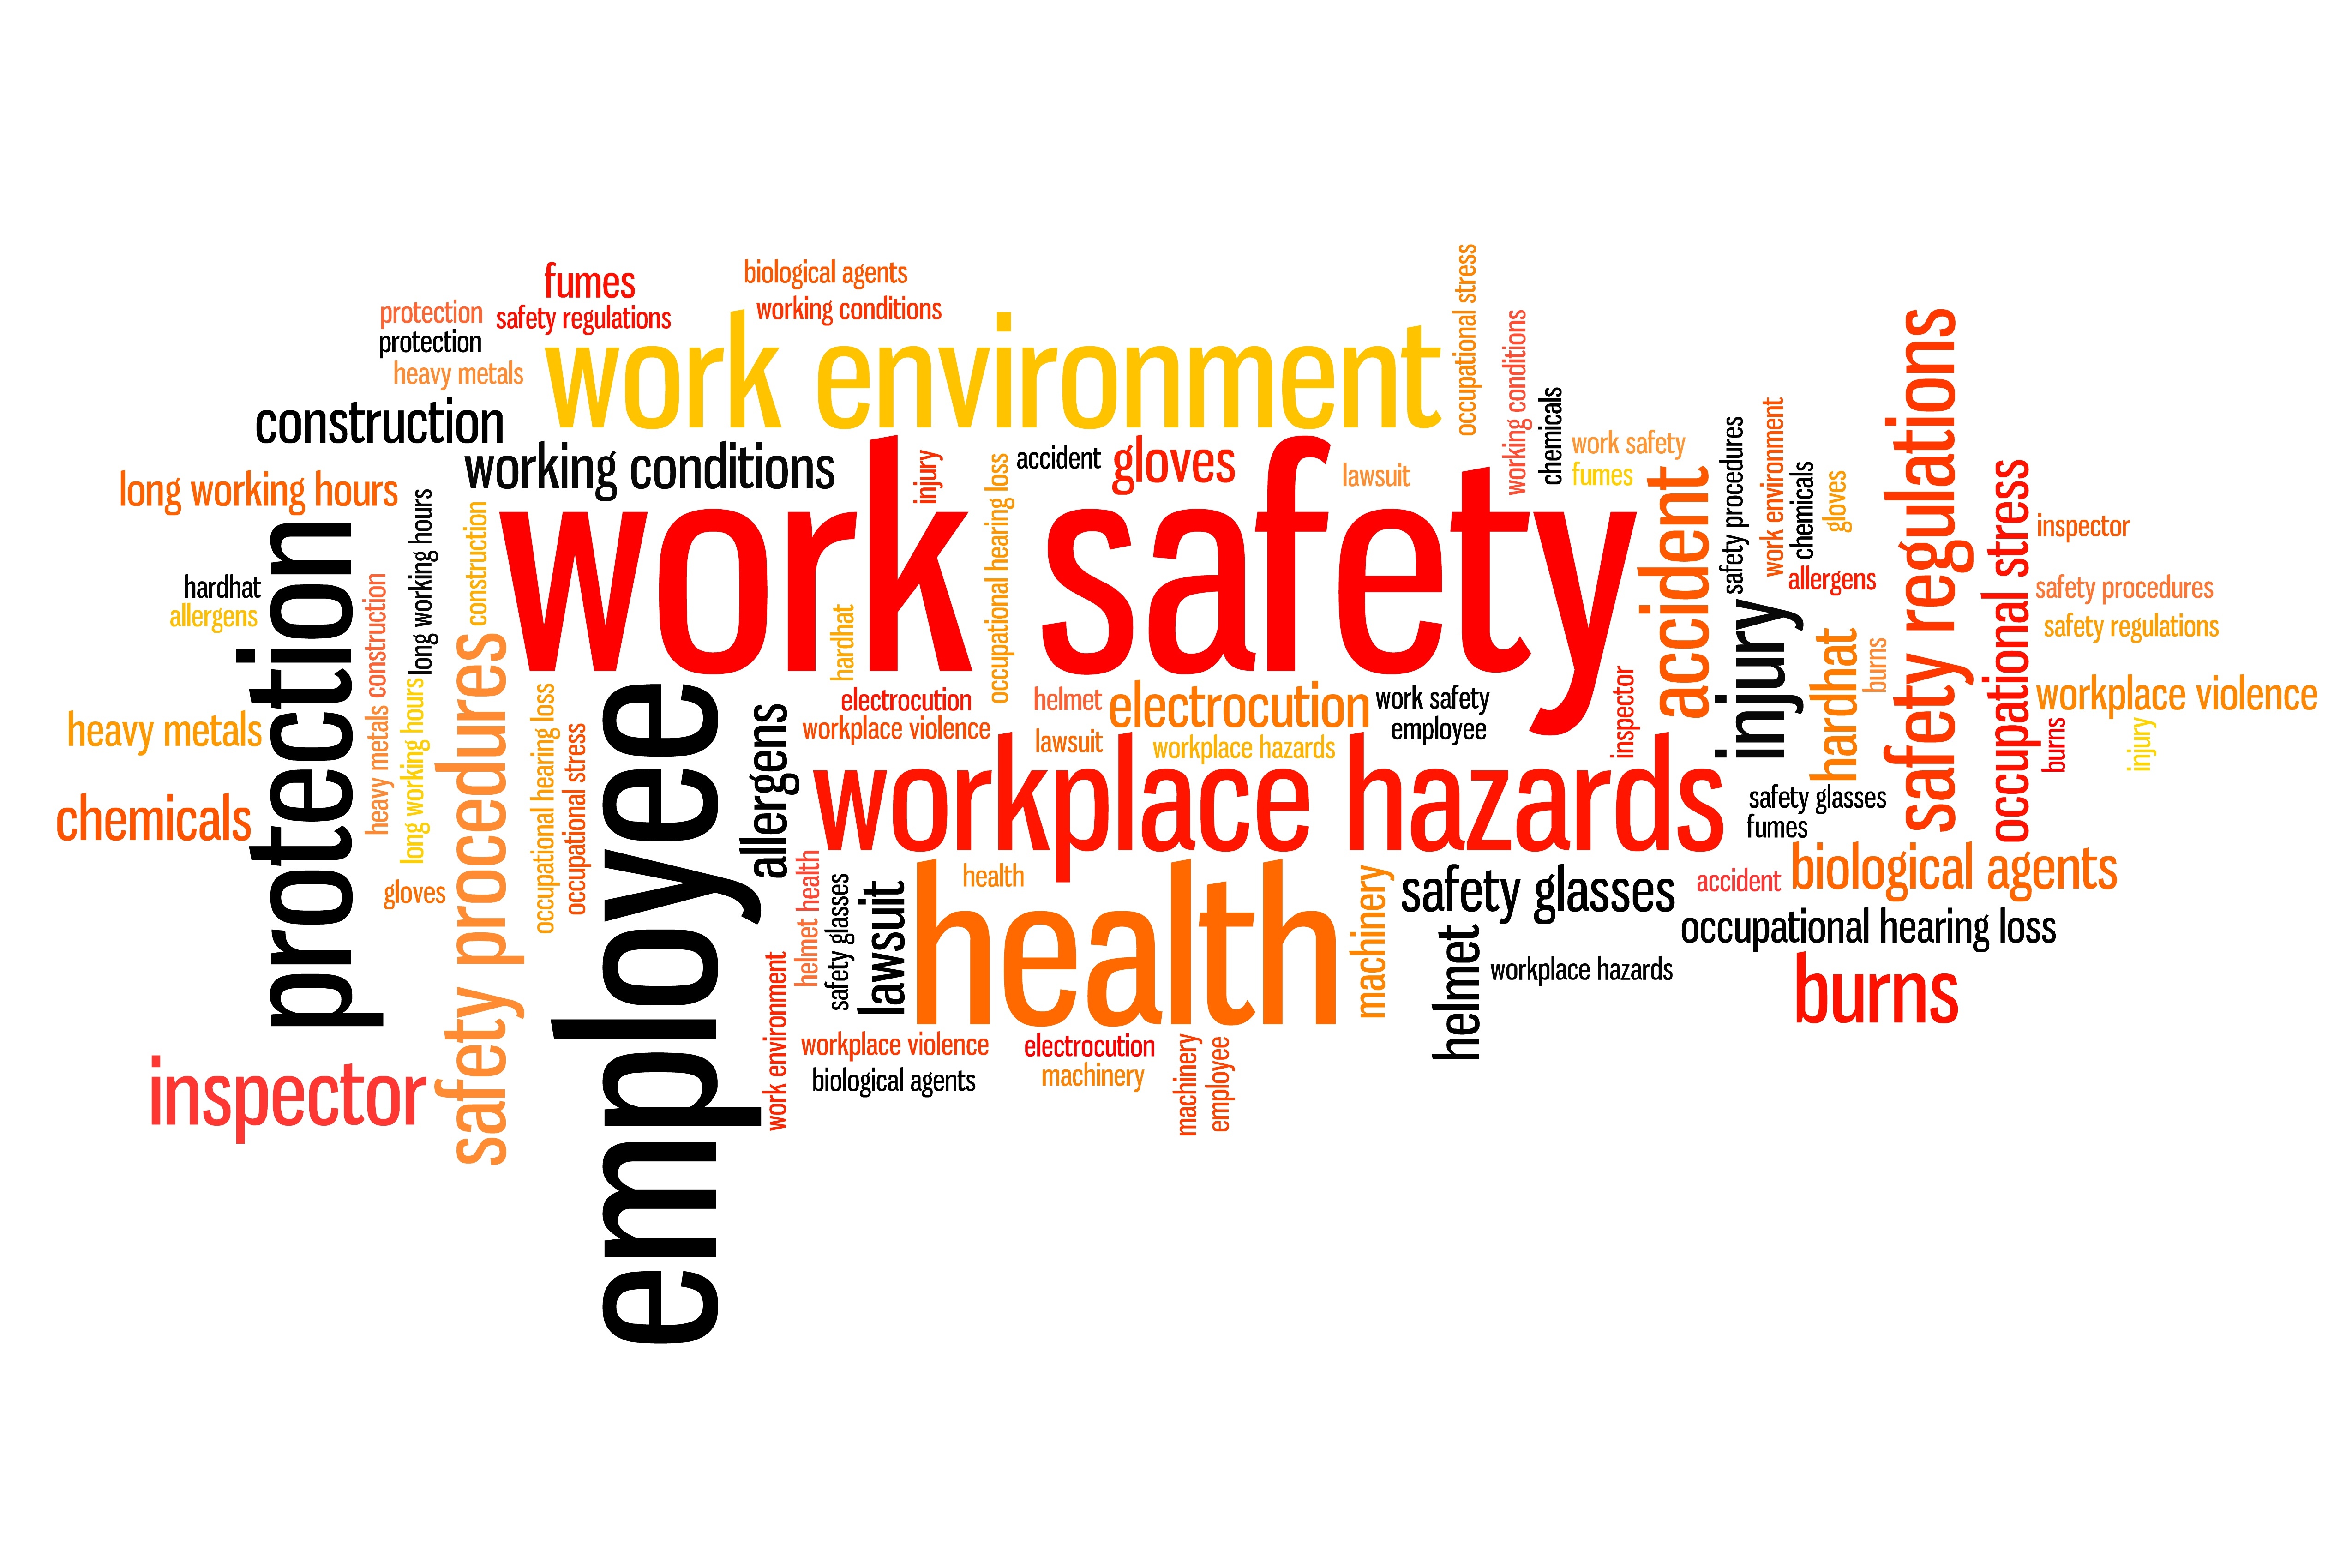 Keeping employees safe comes first